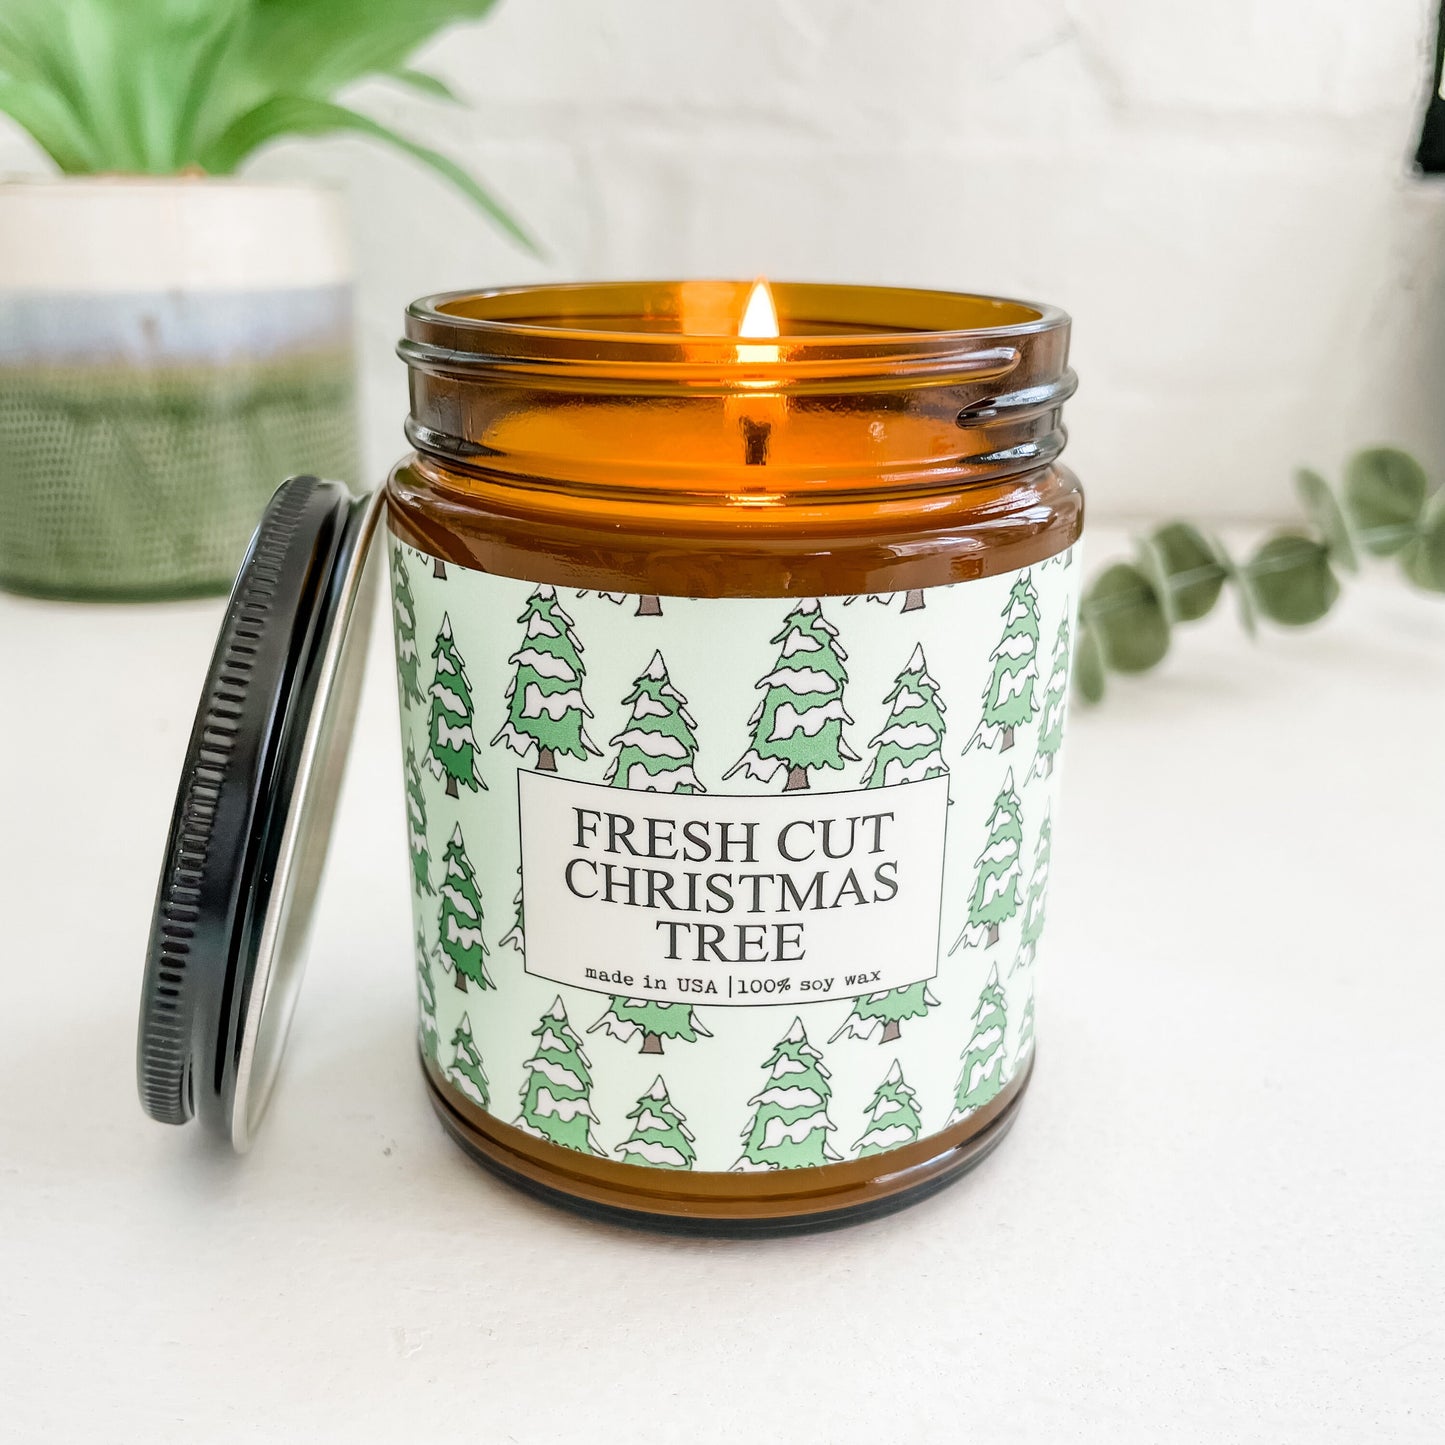 Fresh Cut Christmas Tree Scented Candle - 9oz Glass Jar Soy Candle - Christmas Candle